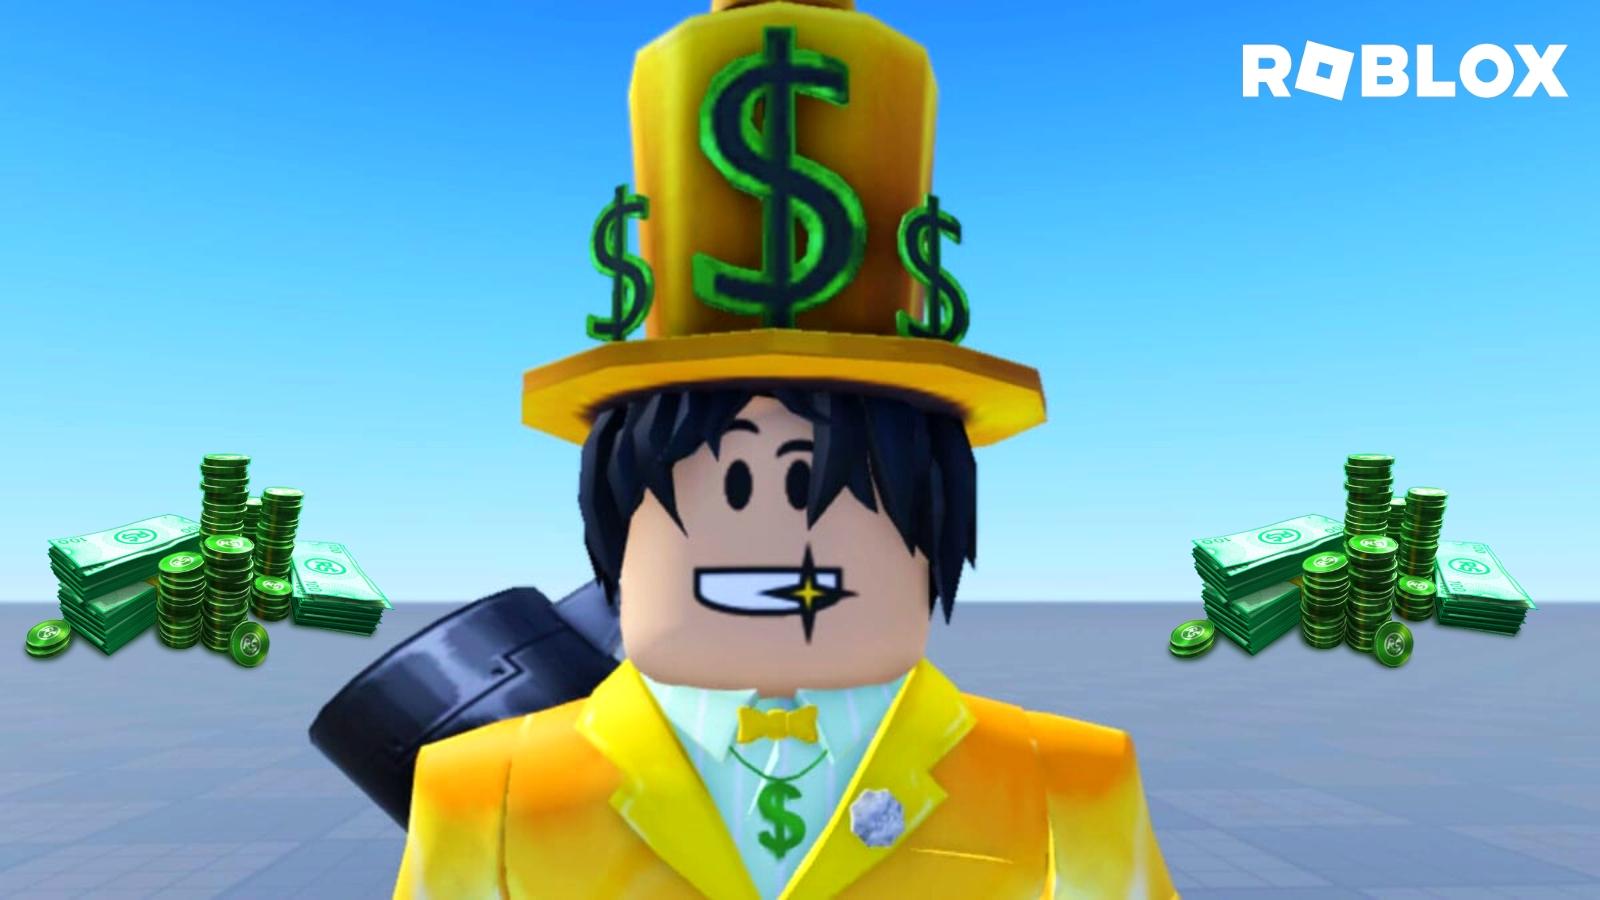 ROBLOX PLAYERS